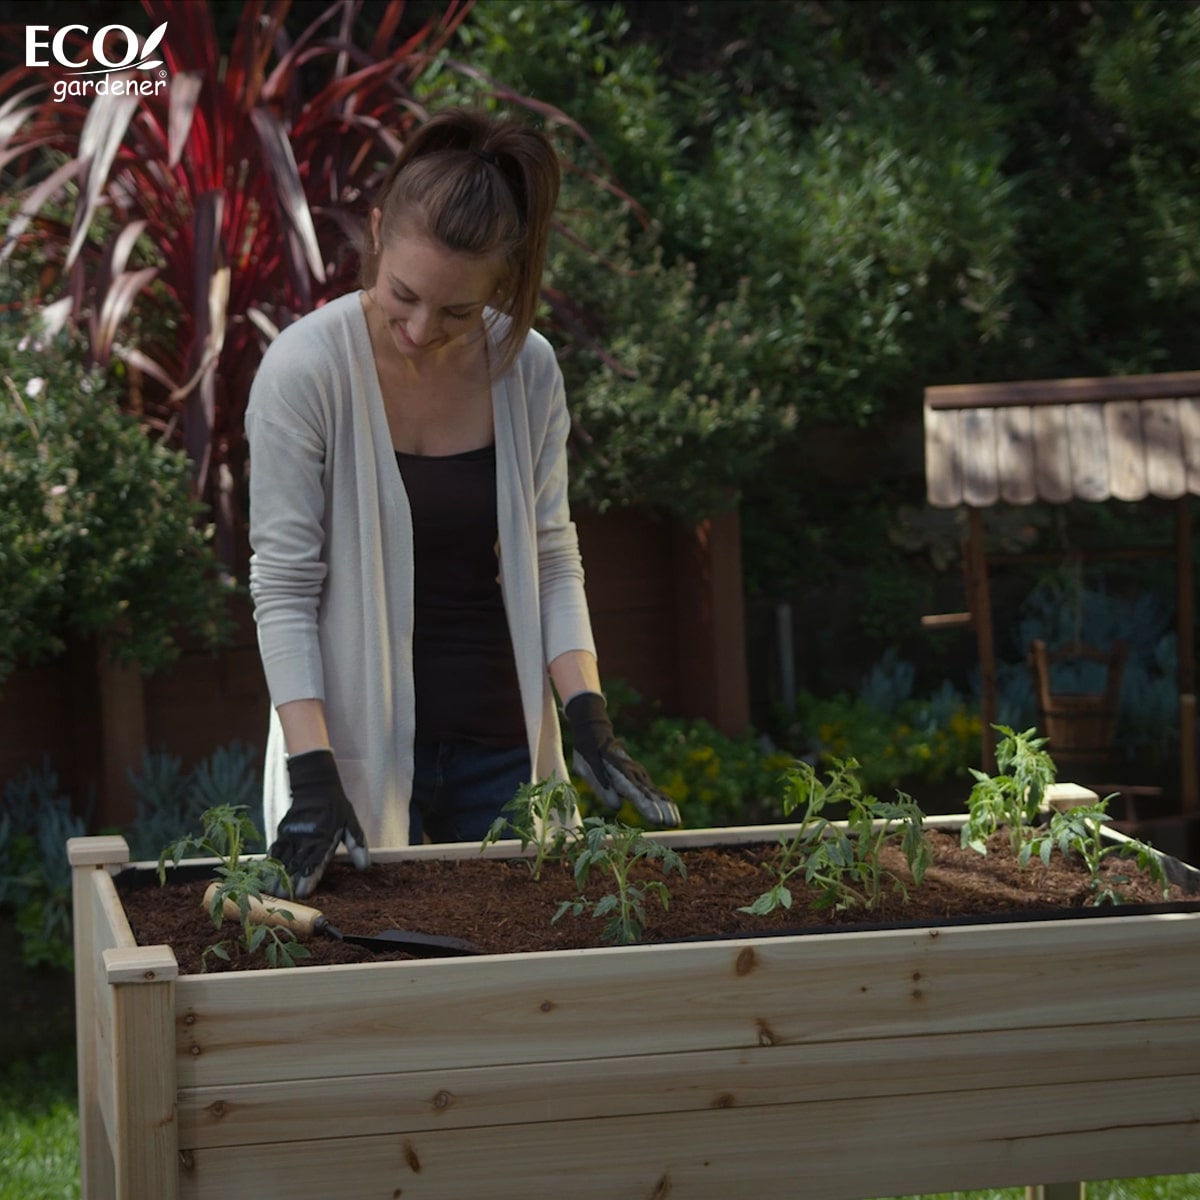 A woman checking her plants in Ecogardener Elevated Raised Bed